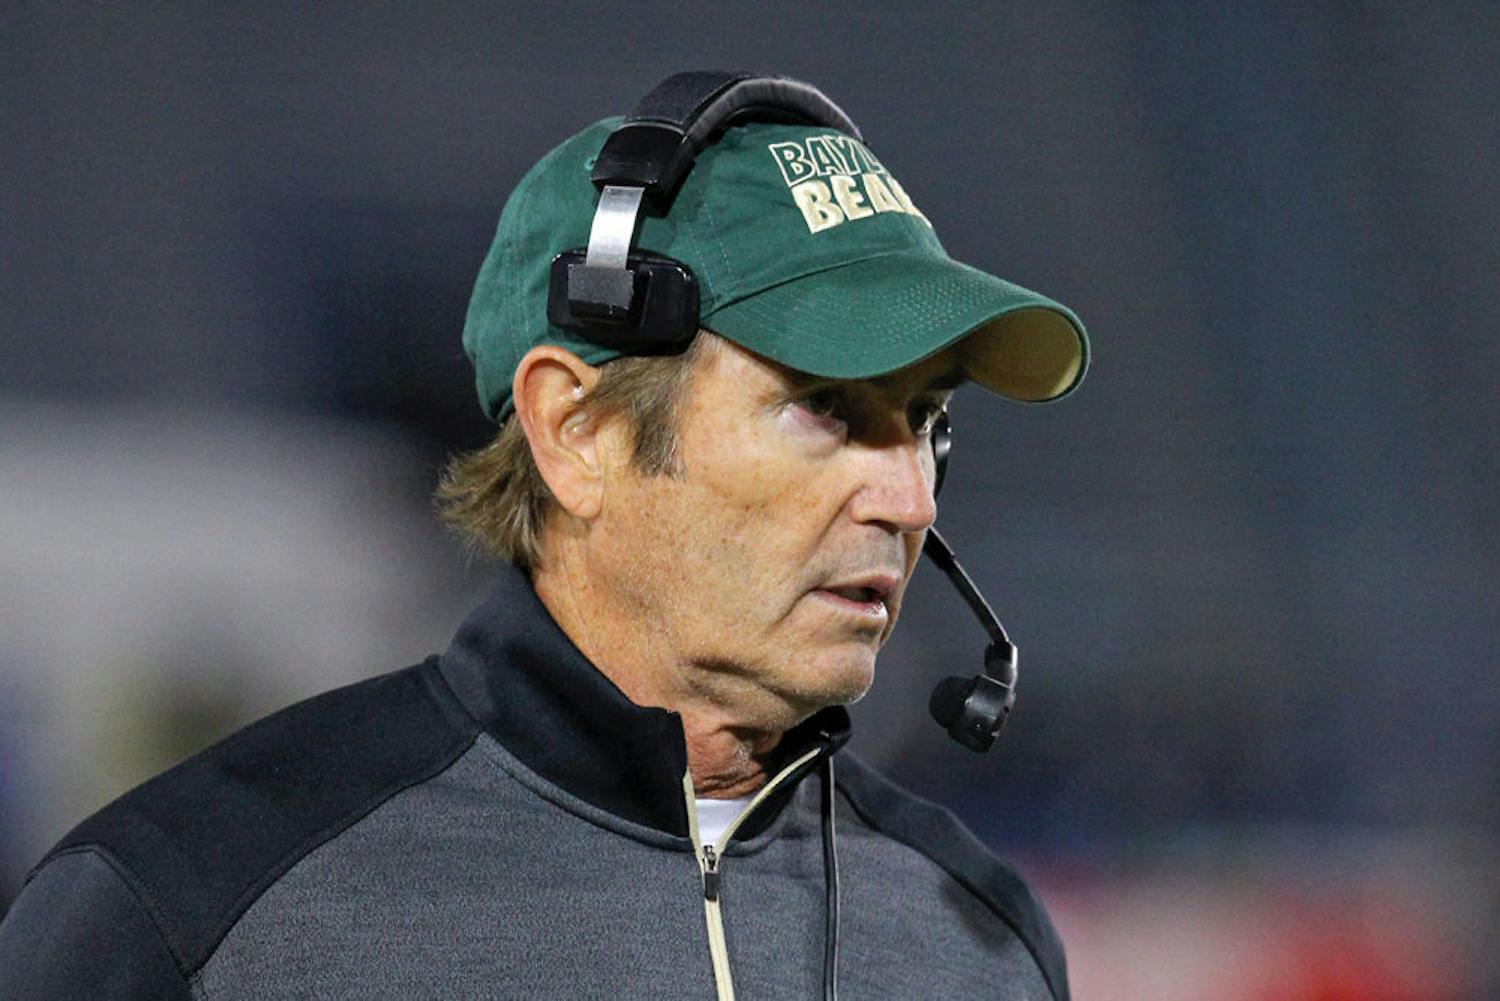 Baylor coach Art Briles walks the sideline during his team's NCAA college football game against Buffalo in Amherst, New York, on Sept. 12, 2014.